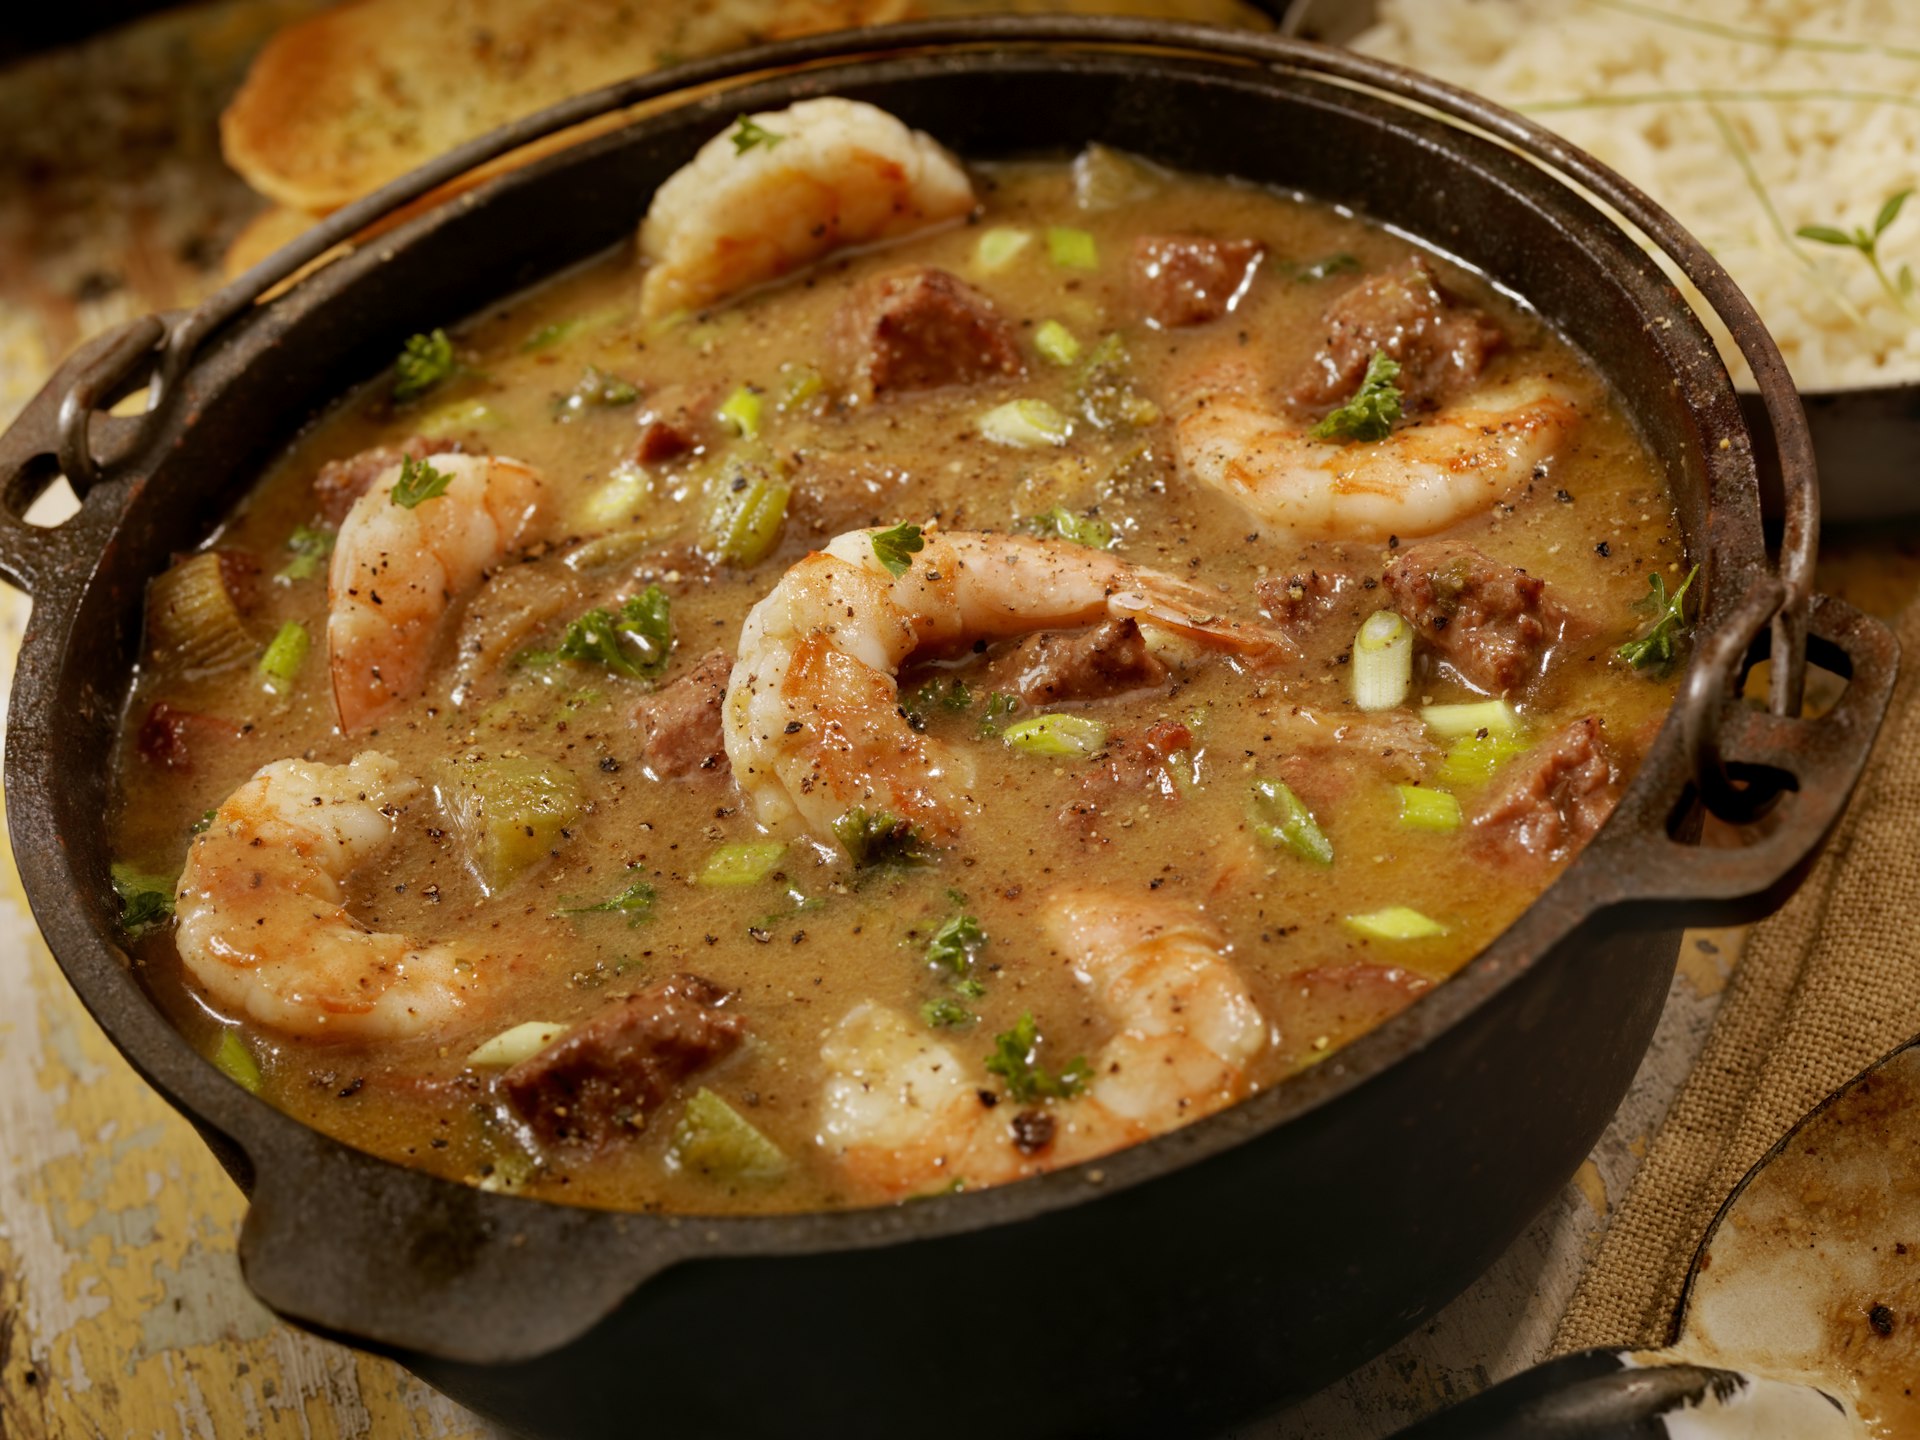 A pot of Creole-style shrimp and sausage gumbo with white rice and French bread served in New Orleans